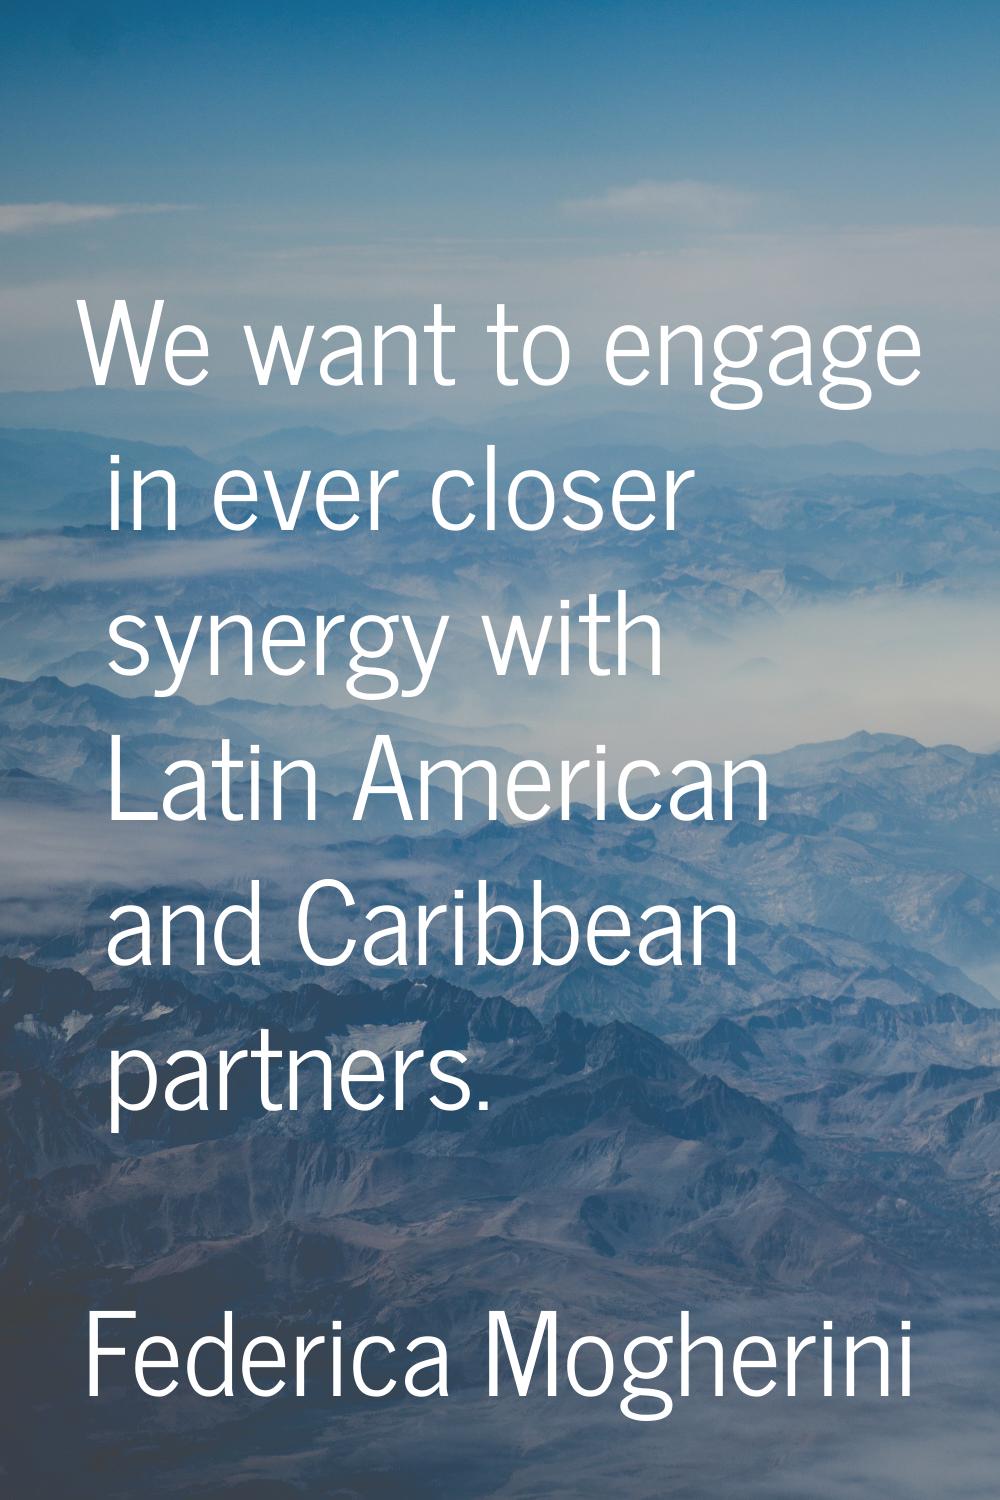 We want to engage in ever closer synergy with Latin American and Caribbean partners.